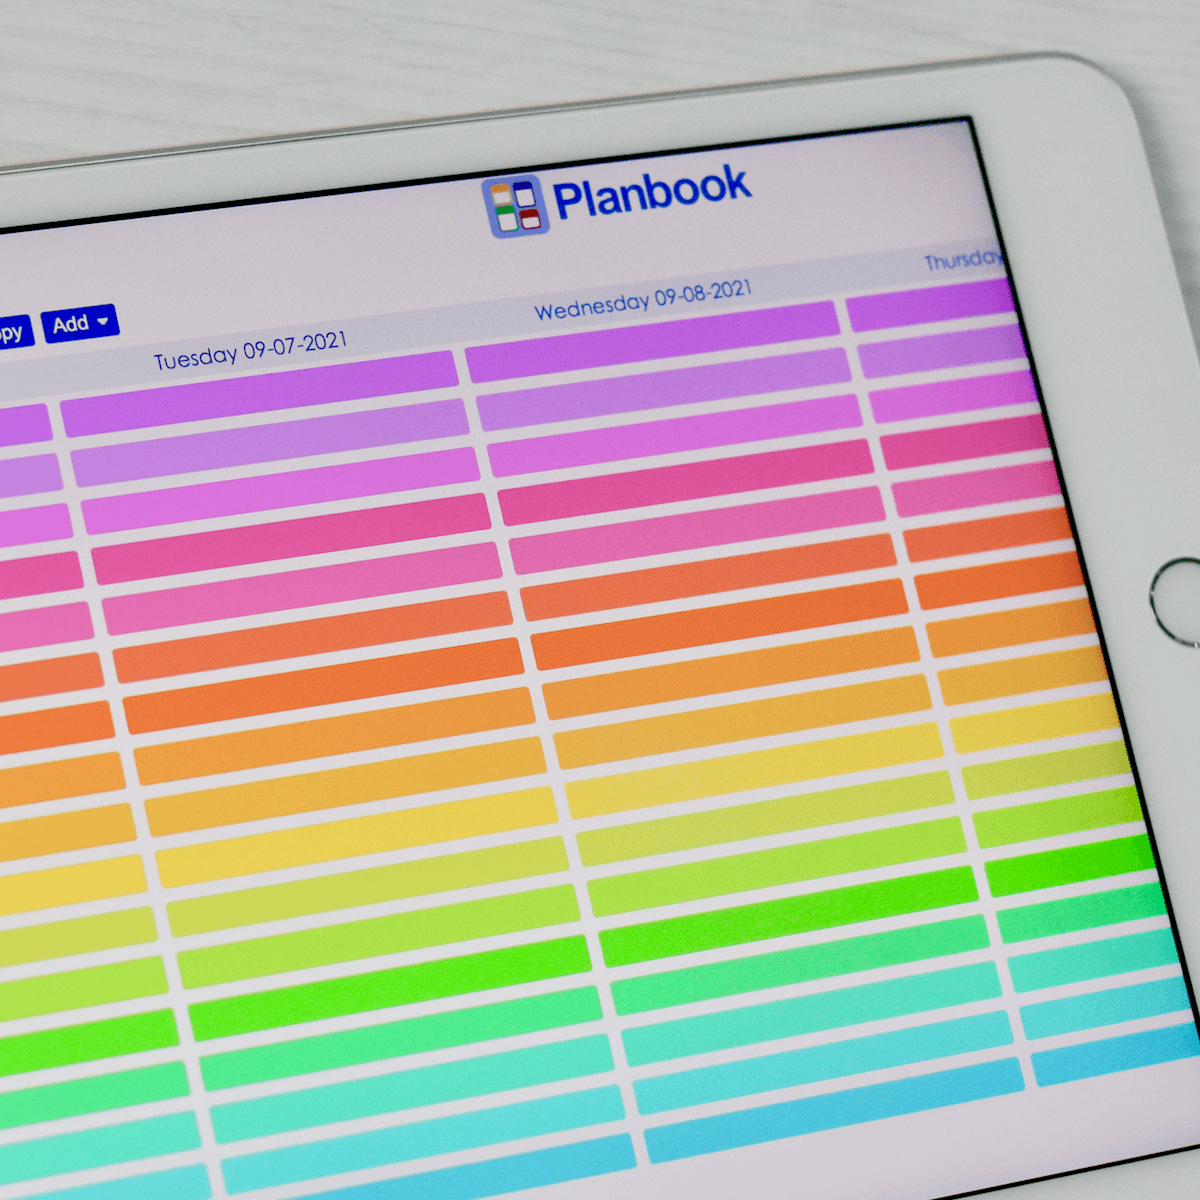 Adding Custom Colors to Planbook